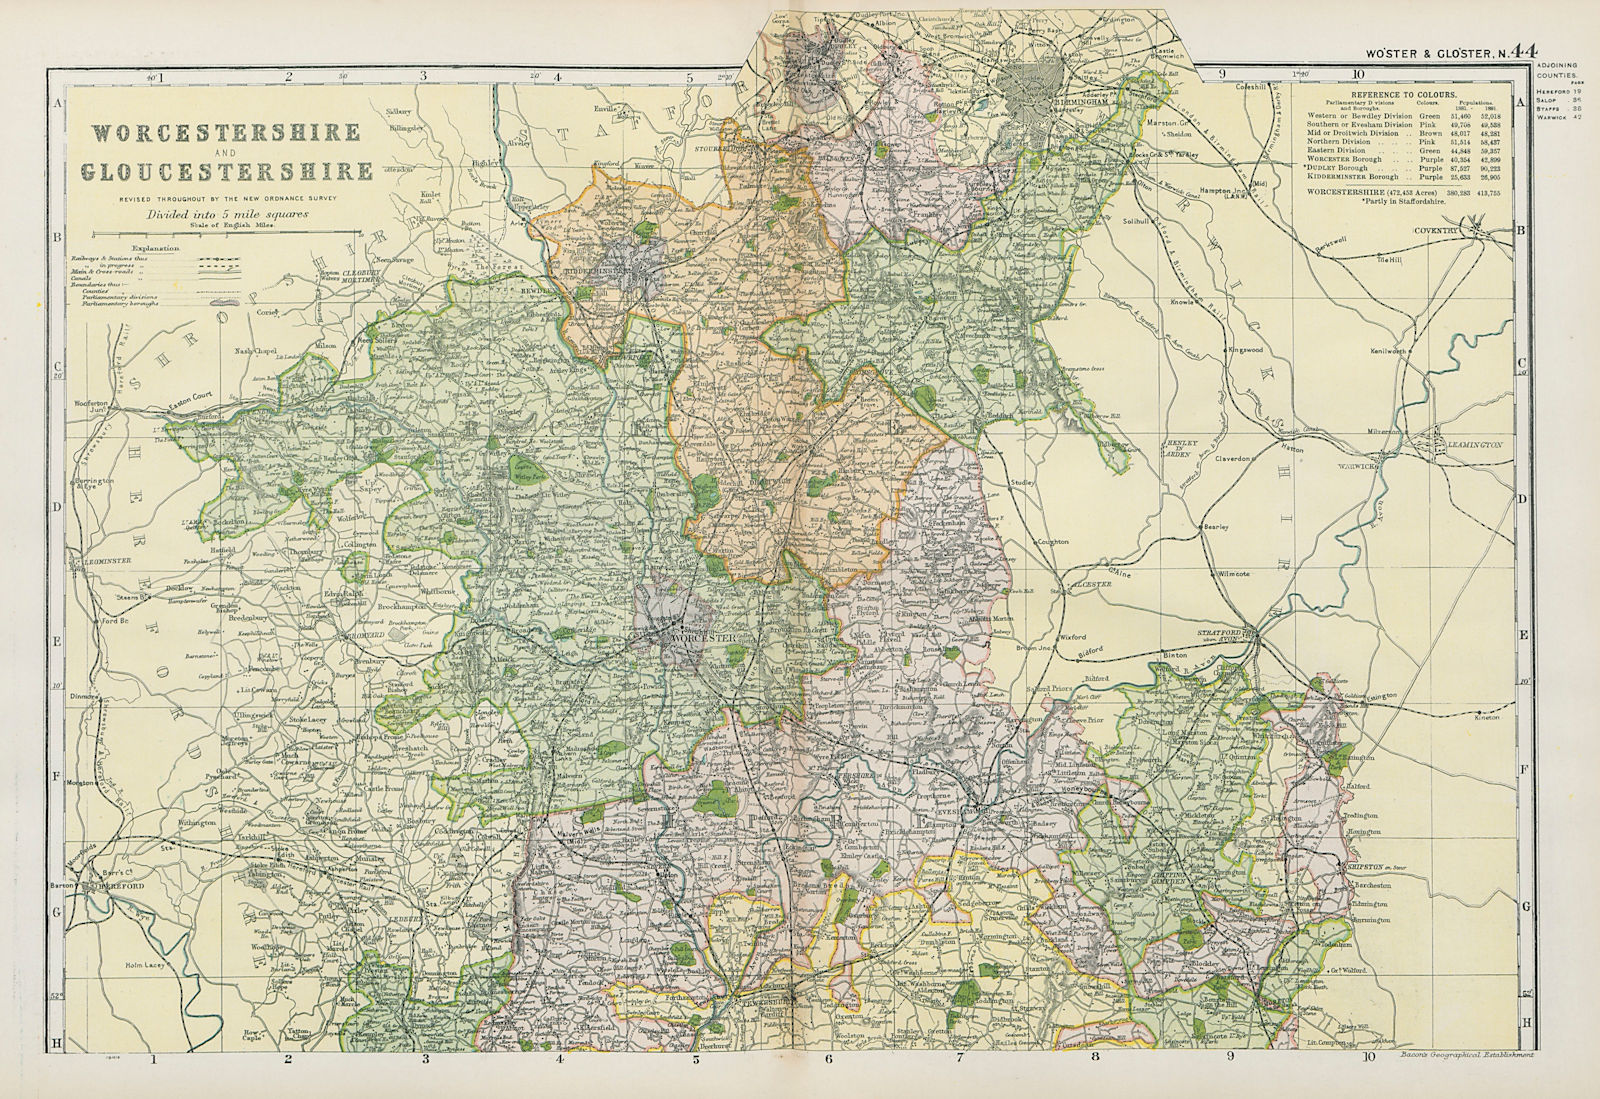 WORCESTERSHIRE & GLOUCESTERSHIRE NORTH. Parliamentary divisions. BACON 1900 map